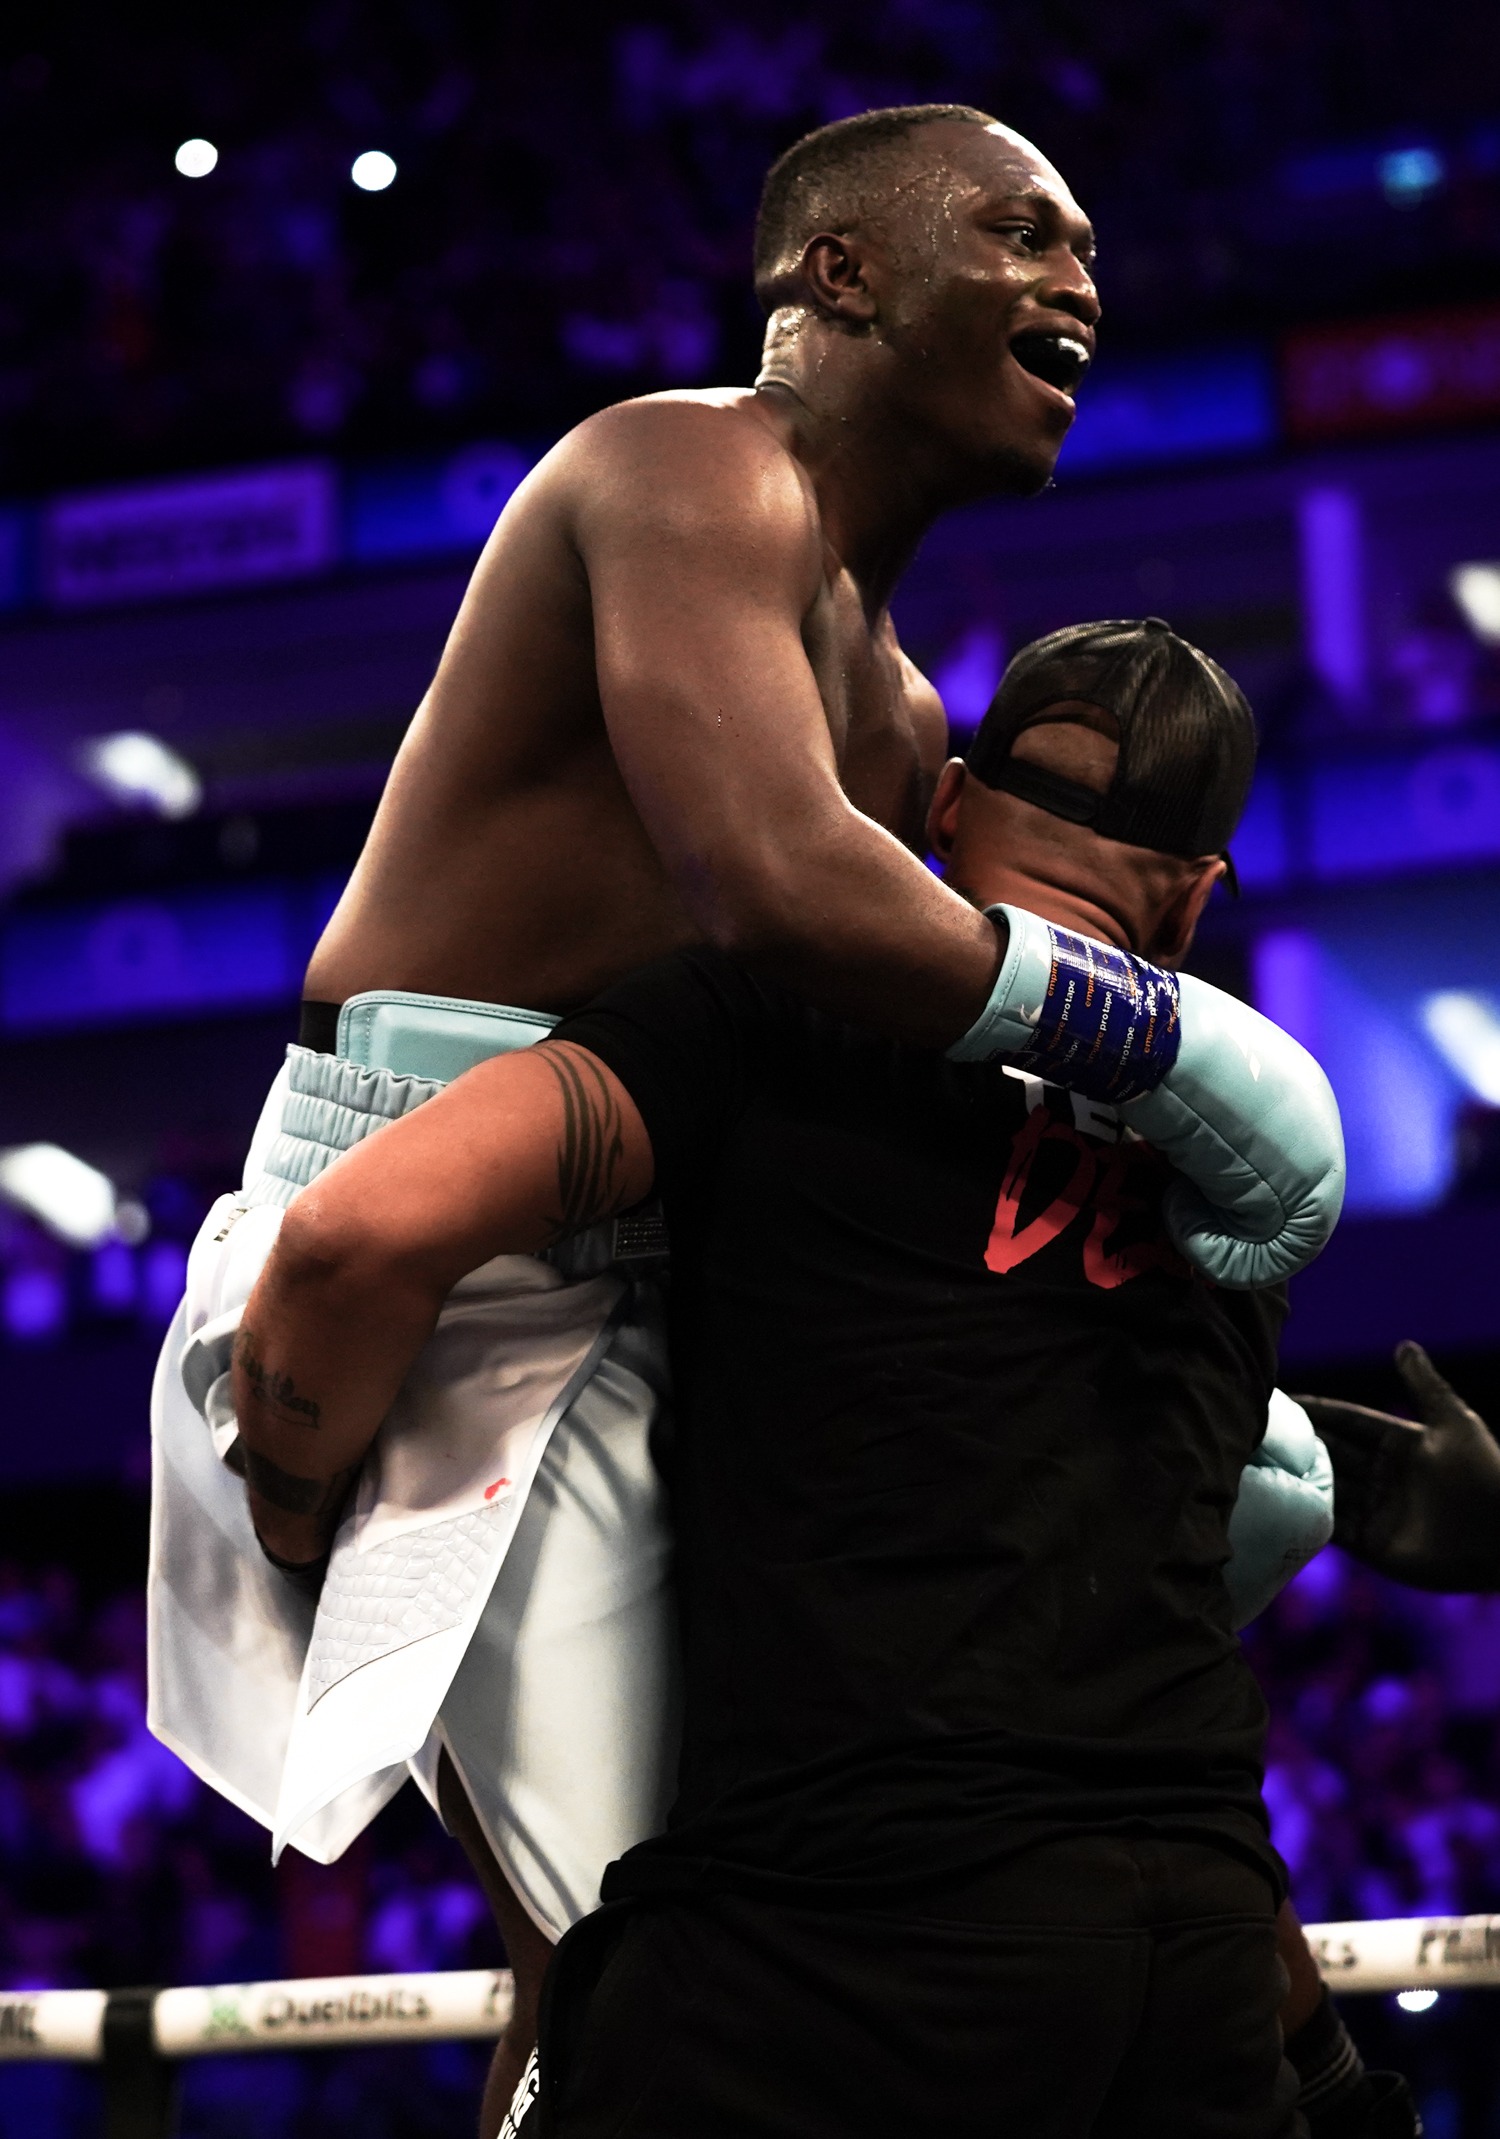 , KSI reveals fighting on same night as brother Deji stresses out their parents but ‘unites us even more’